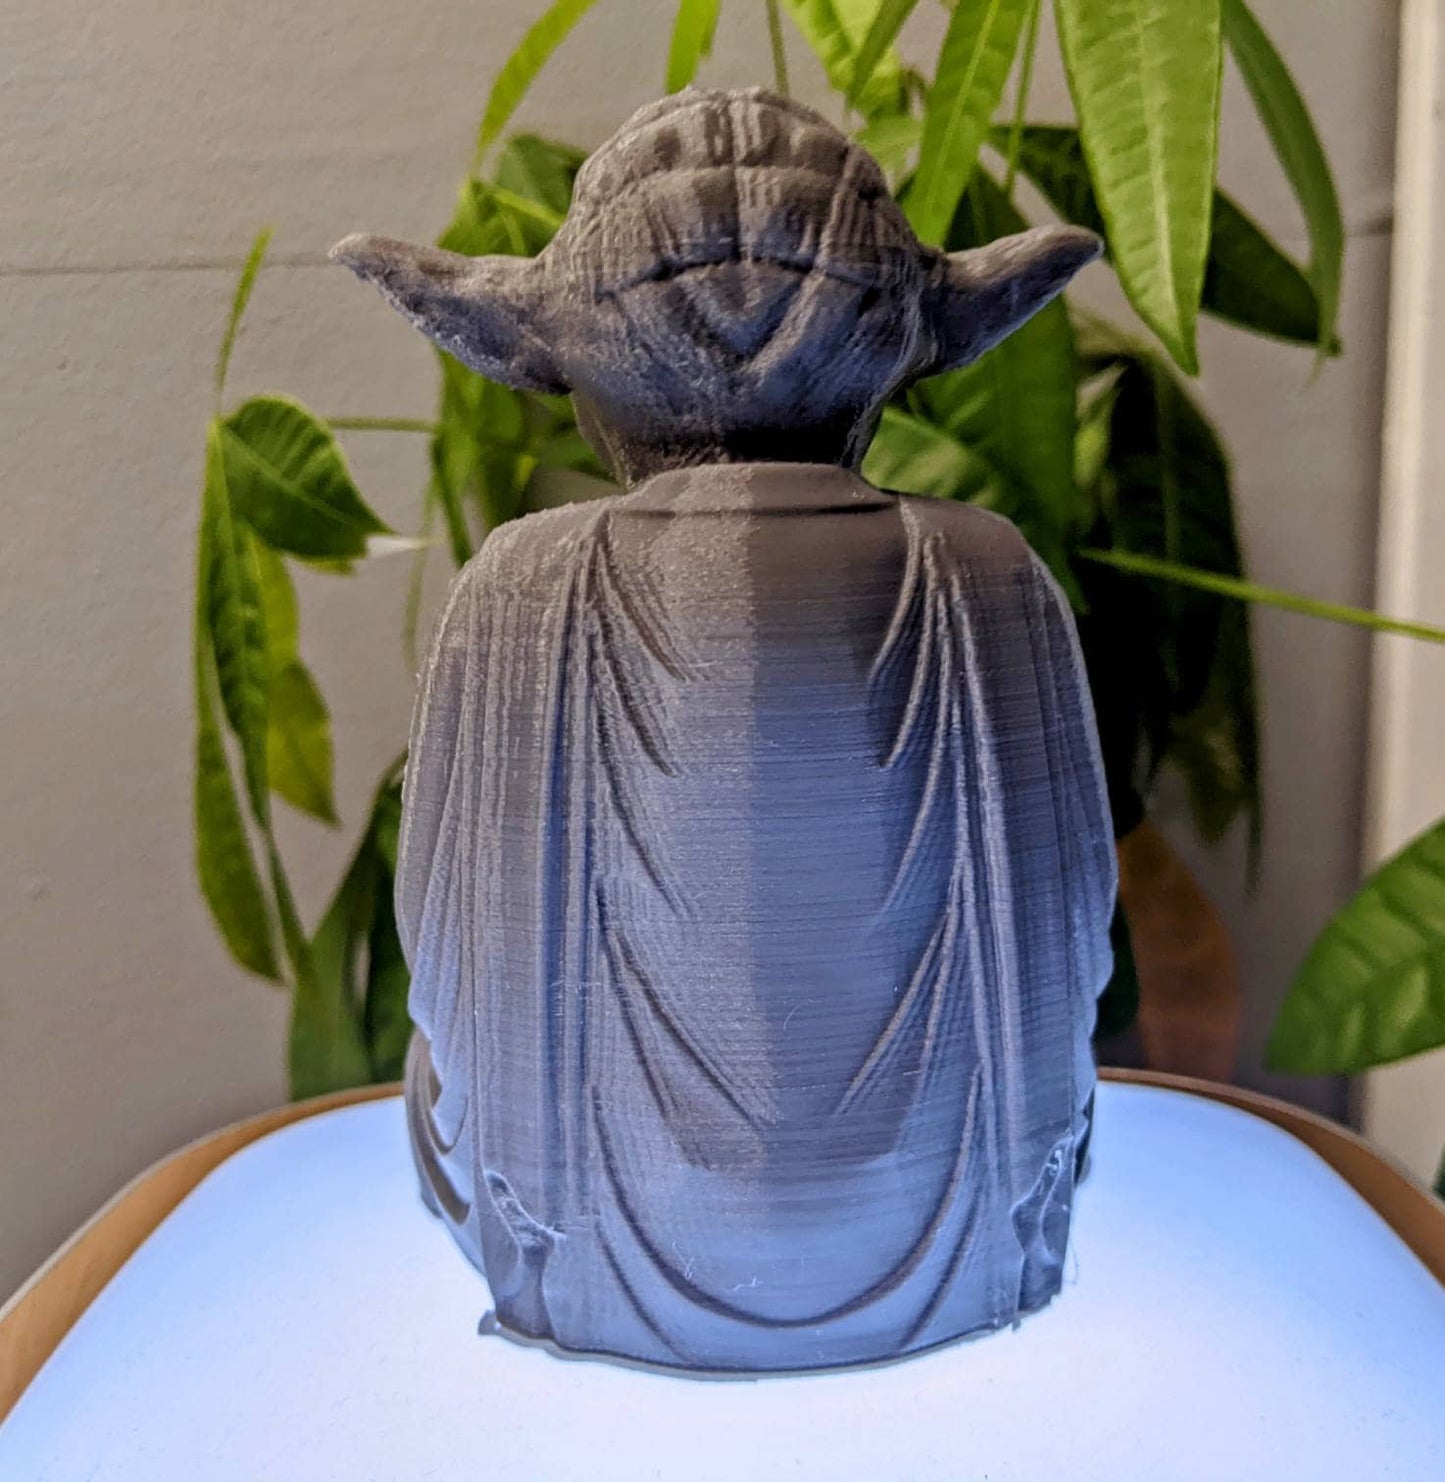 New Yoda Buddha Figure With Heart inspired by Star Wars